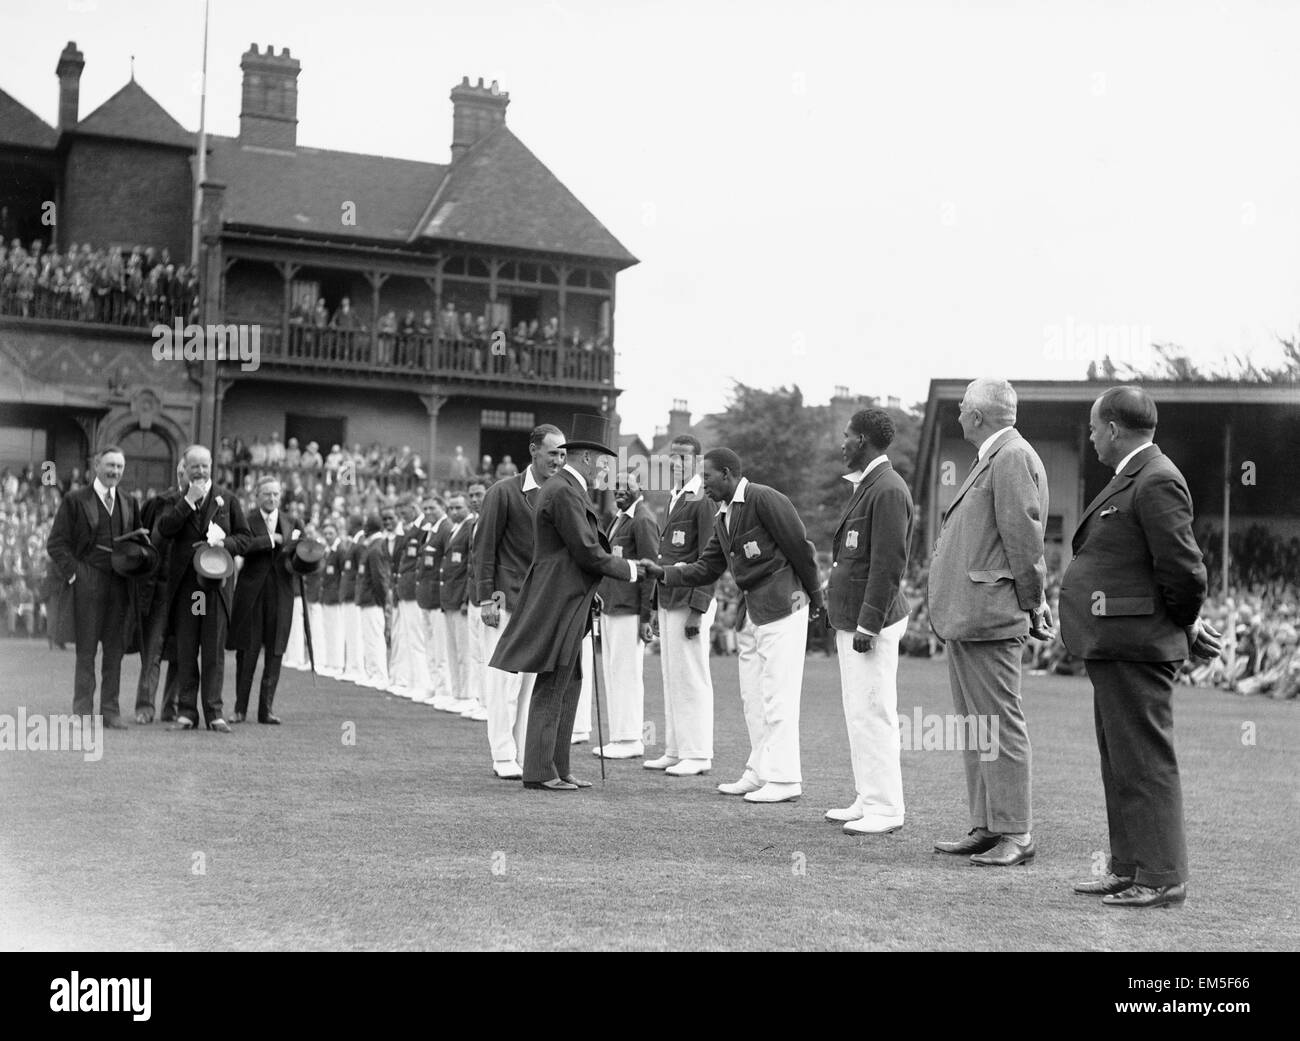 Re Giorgio V a Nottingham, Lug 1928 SALUTO L N Costantino il West Indian Cricketer Foto Stock